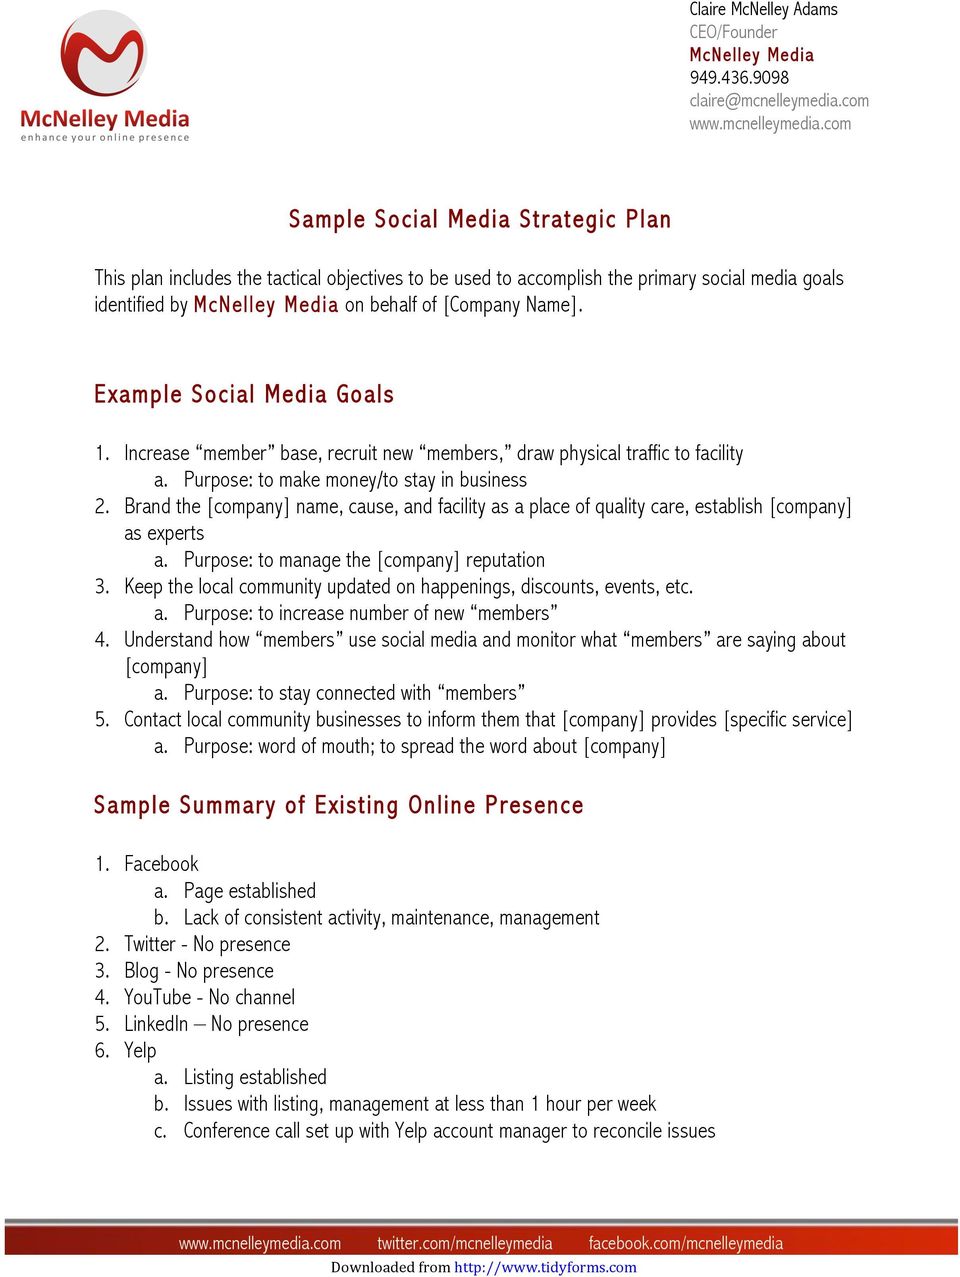 com Sample Social Media Strategic Plan This plan includes the tactical objectives to be used to accomplish the primary social media goals identified by McNelley Media on behalf of [Company Name].